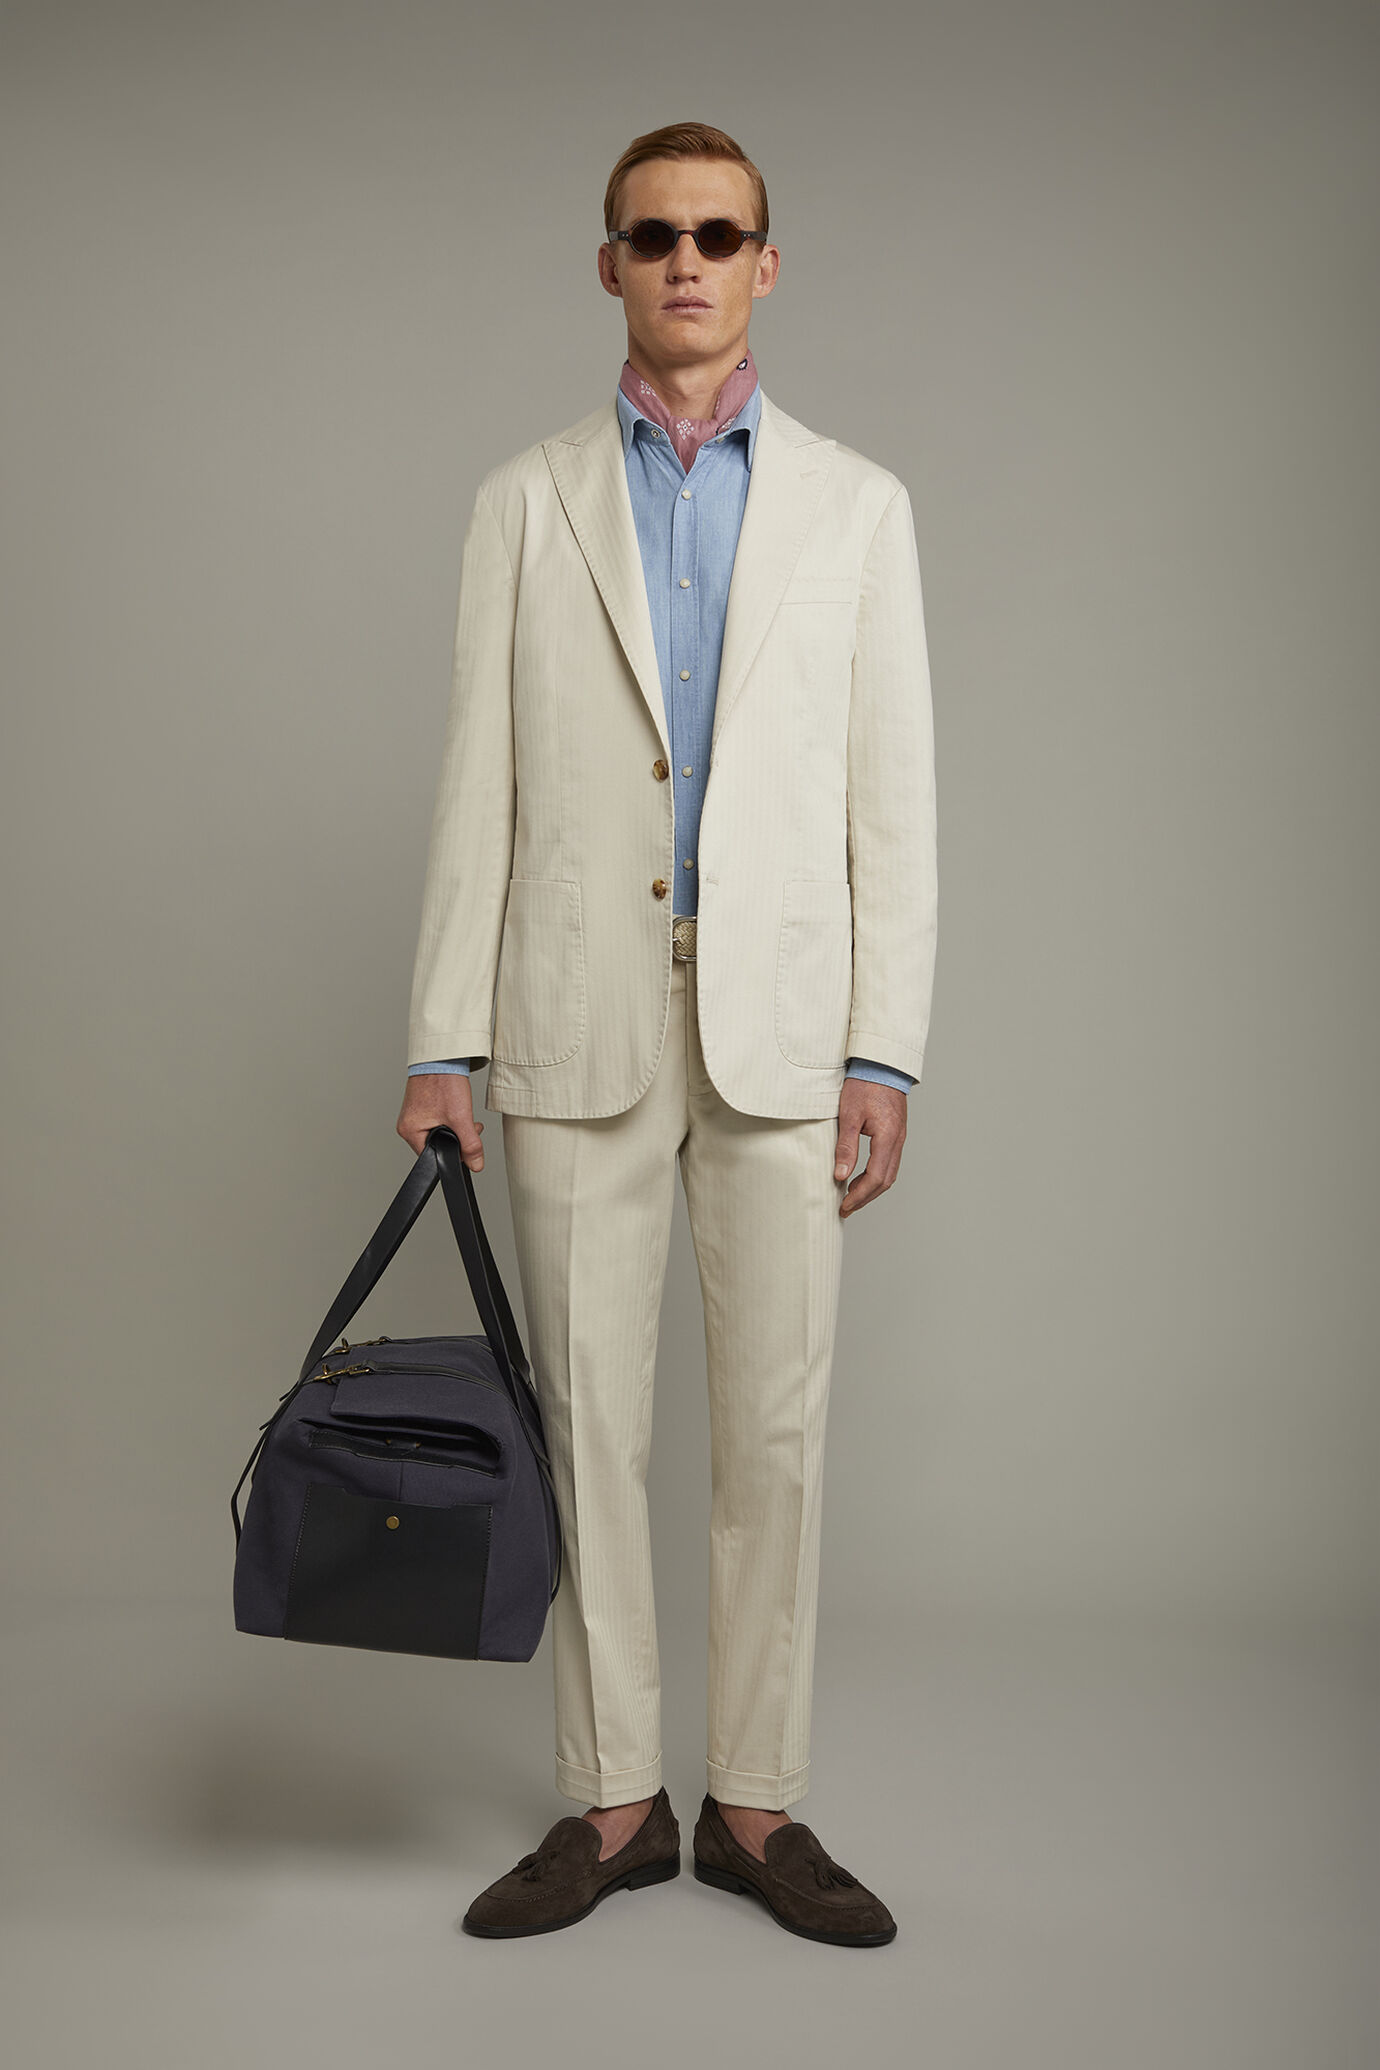 Men's Unlined single-breasted blazer with peak lapels, patch pockets